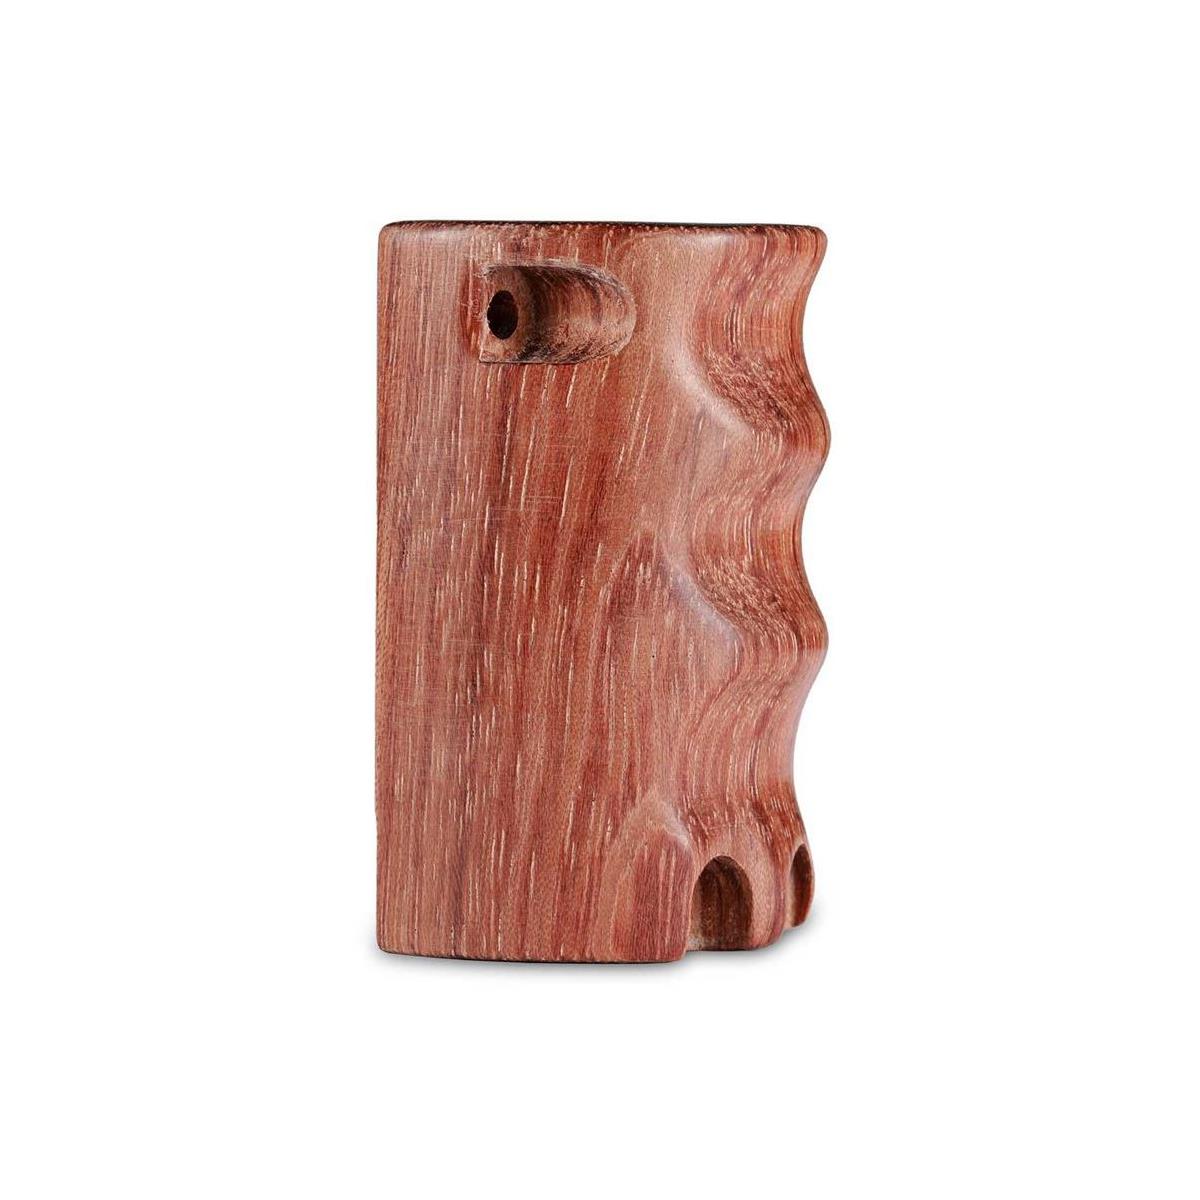 SmallRig Wooden Handgrip for Sony Alpha A6000/A6300/A6500 ILCE-6000/ ILCE-6300/ILCE-6500 Mirrorless Camera Cage - 1970